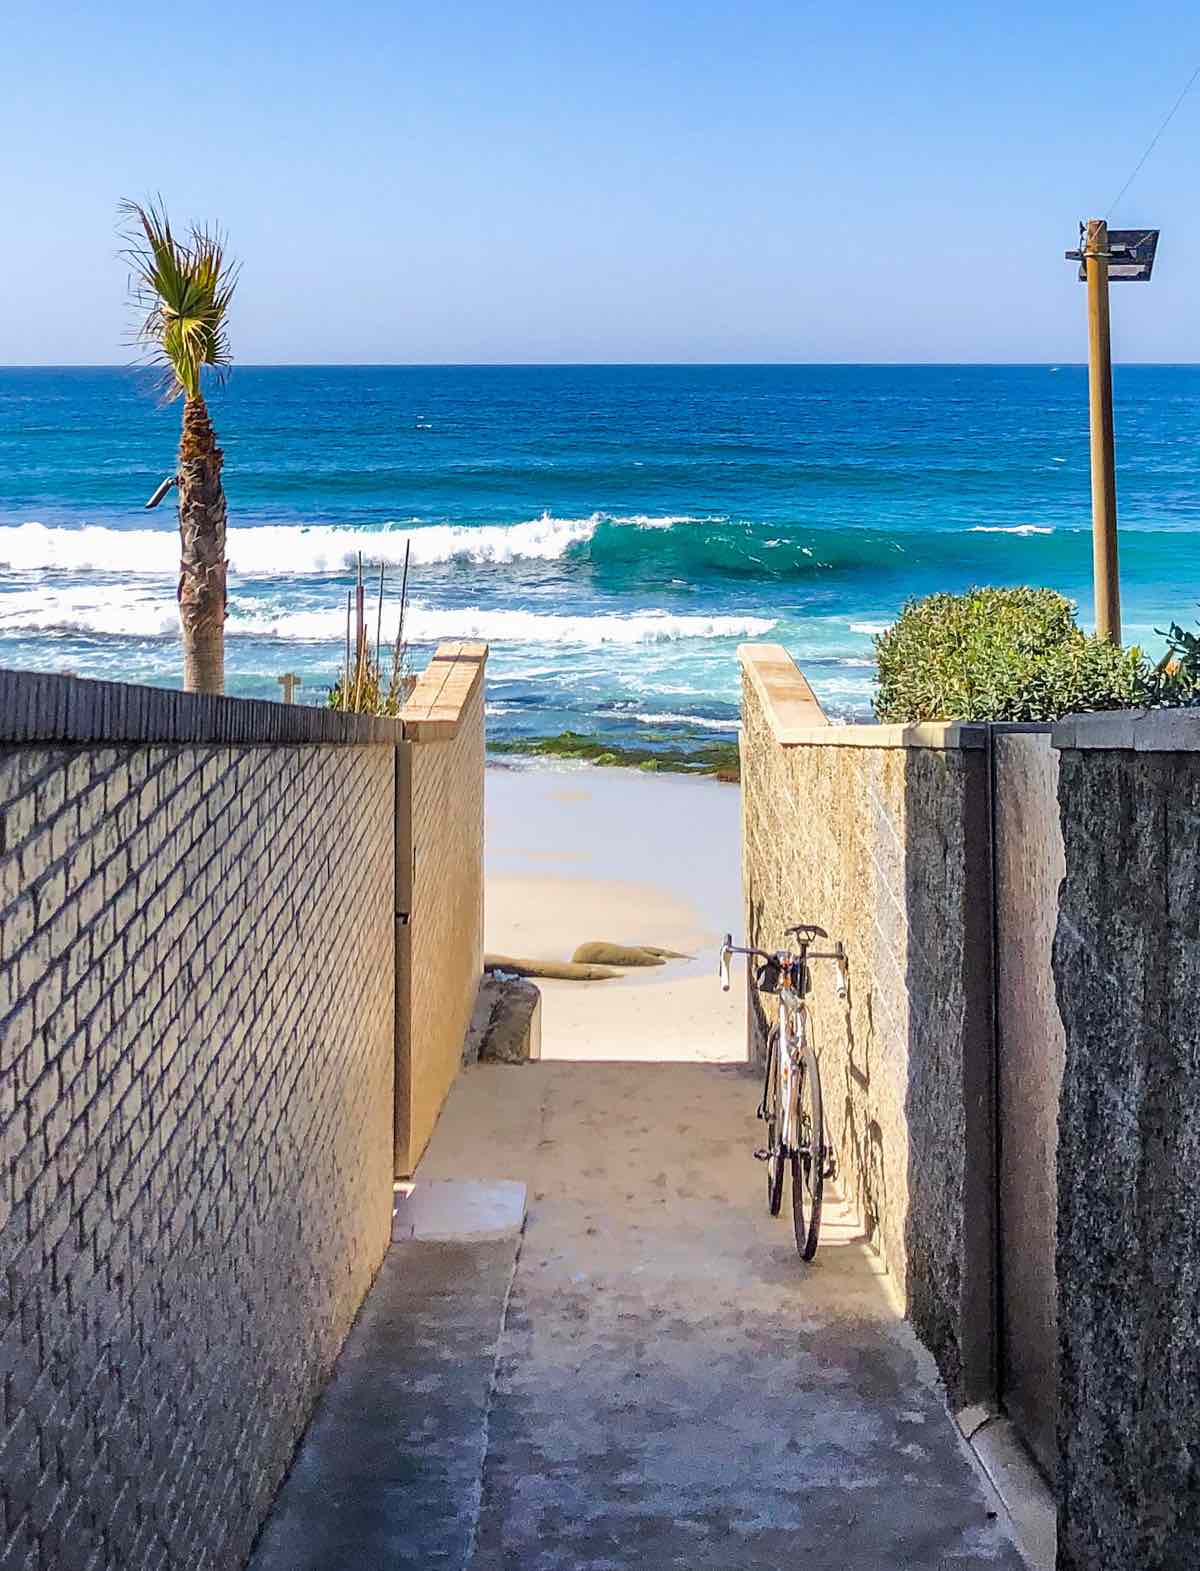 bikerumor pic of the day a bicycle leans against a brick wall hallway that leads to the ocean in Late Feb in La Jolla California the ocean is bright blue with a cloudless sky.